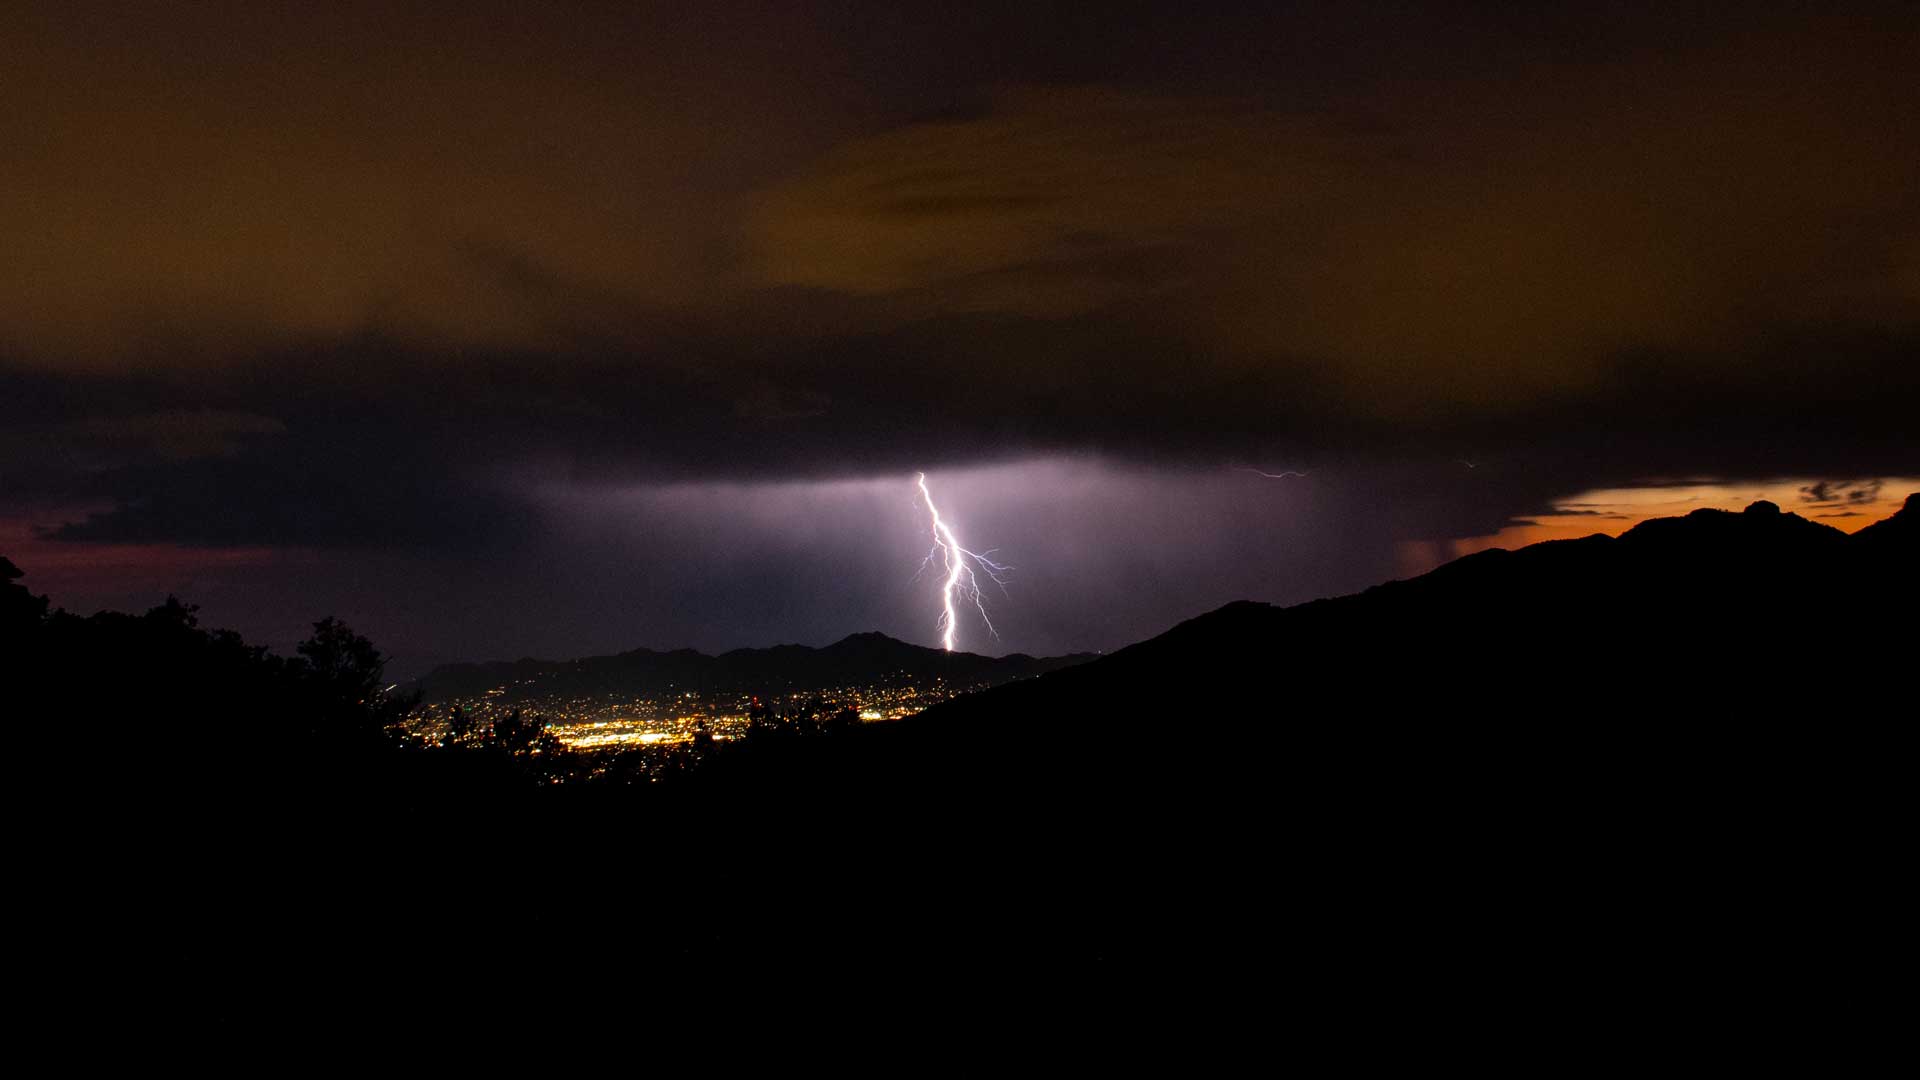 Lightning flashes over the Tucson mountains as seen from Windy Point in the Santa Catalina mountains.